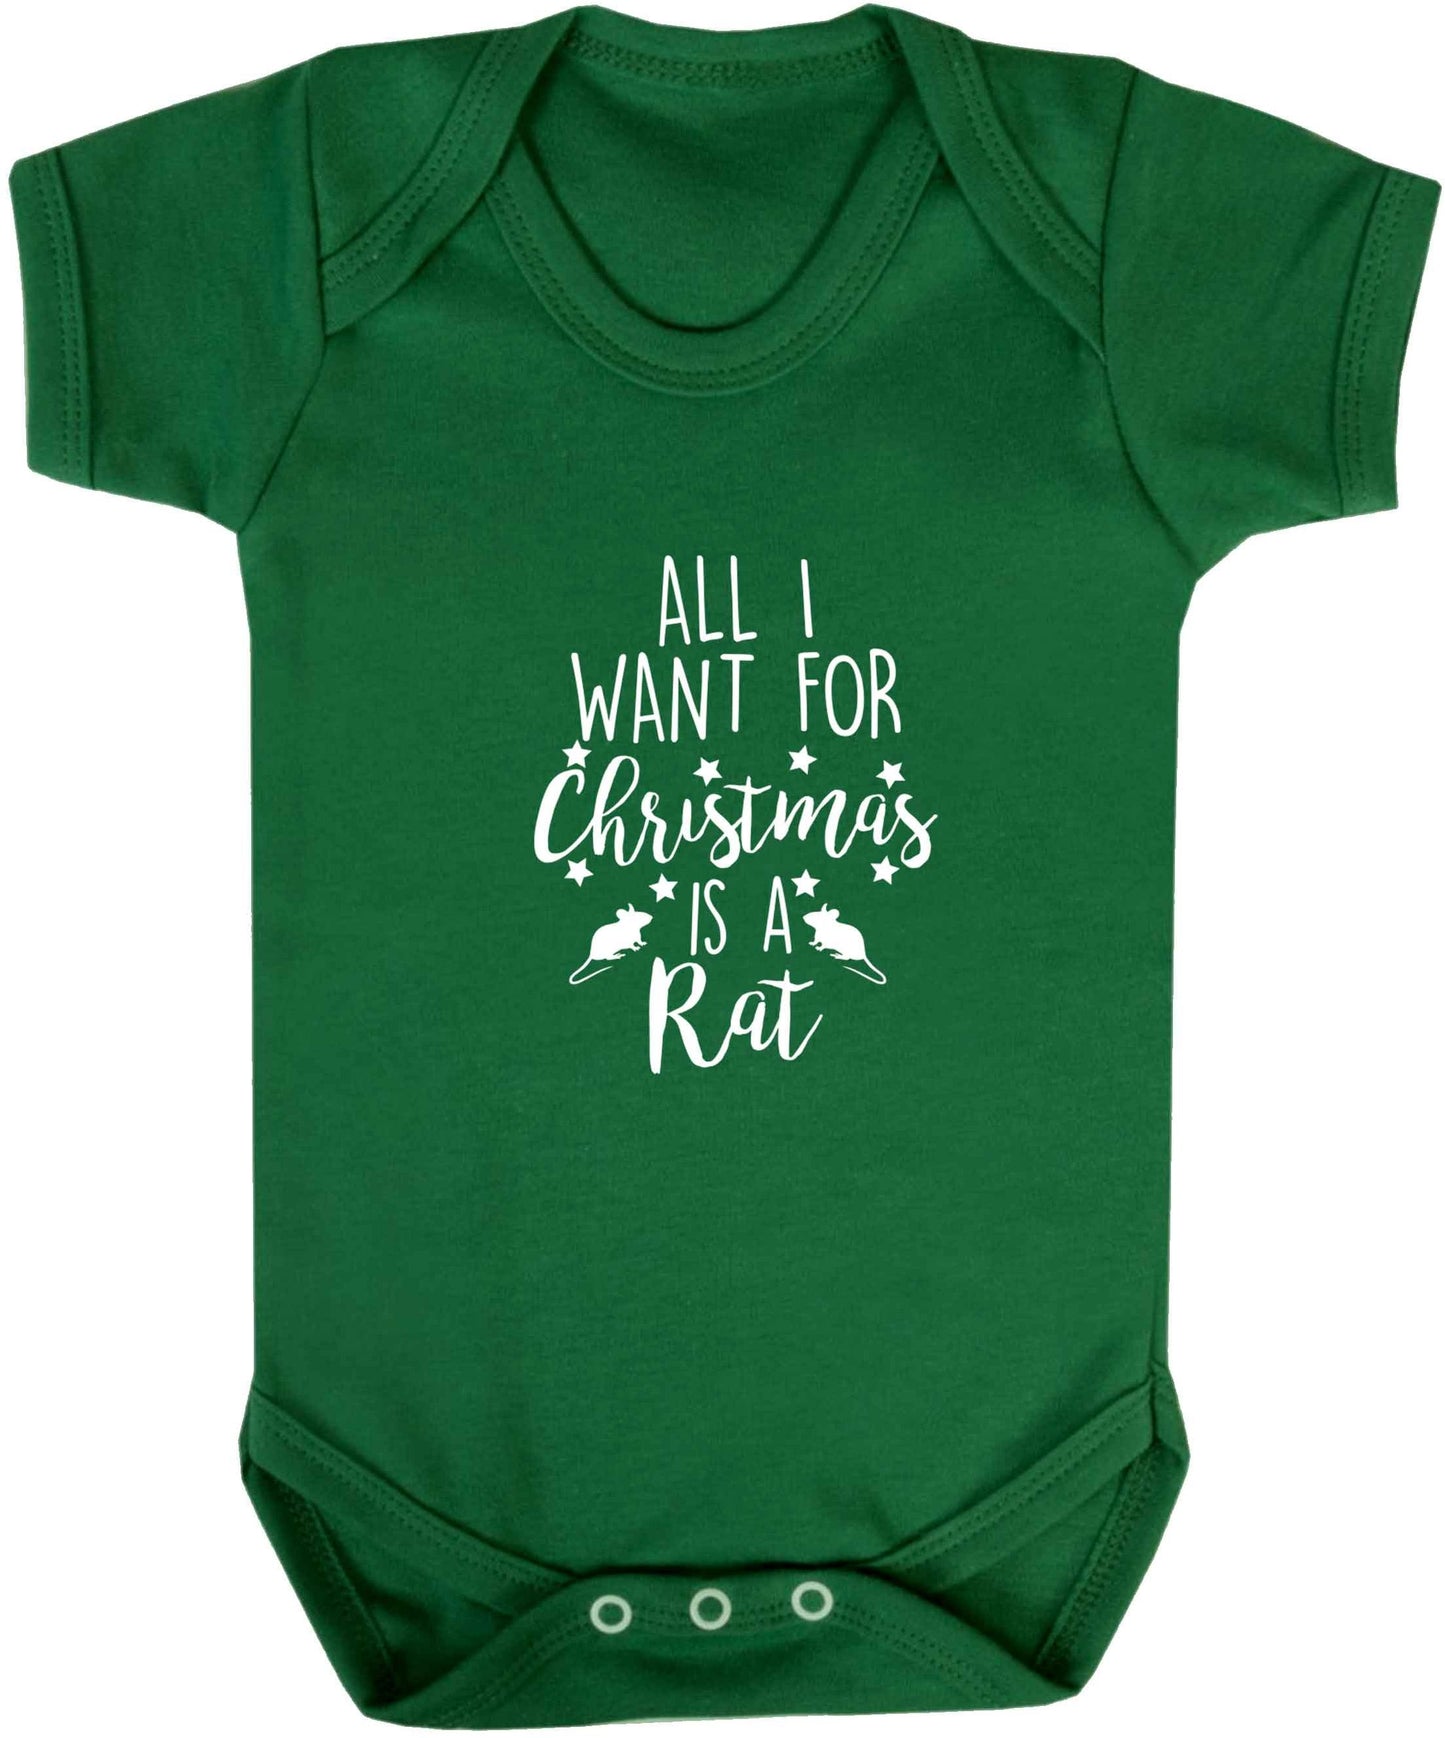 All I want for Christmas is a rat baby vest green 18-24 months